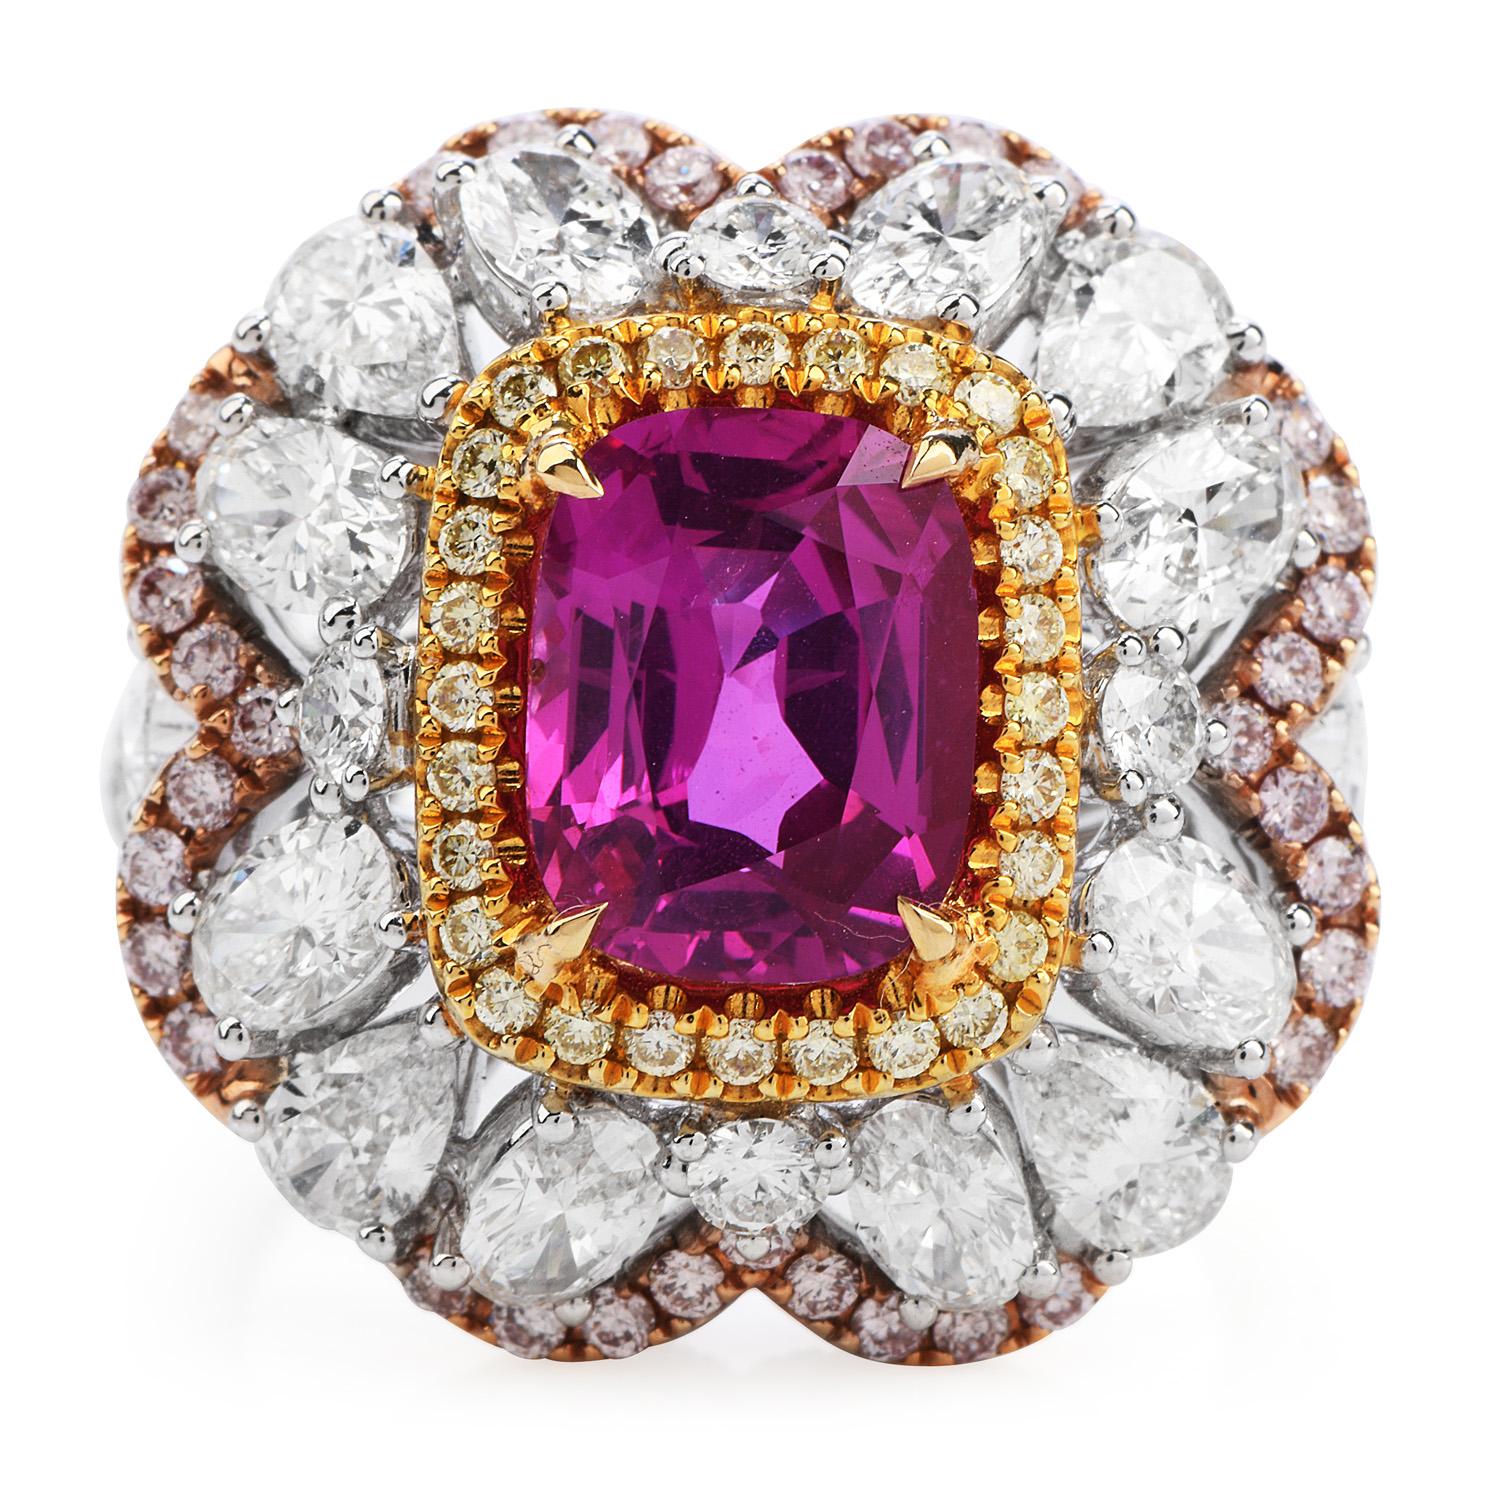 Treat yourself to this irresistibly stunning Diamond & Sri lanka Pink sapphire with fancy natural pink and yellow diamond Large Cocktail Ring!  This ring is hand crafted mainly in 18-karat white gold with some yellow and pink gold .  The center